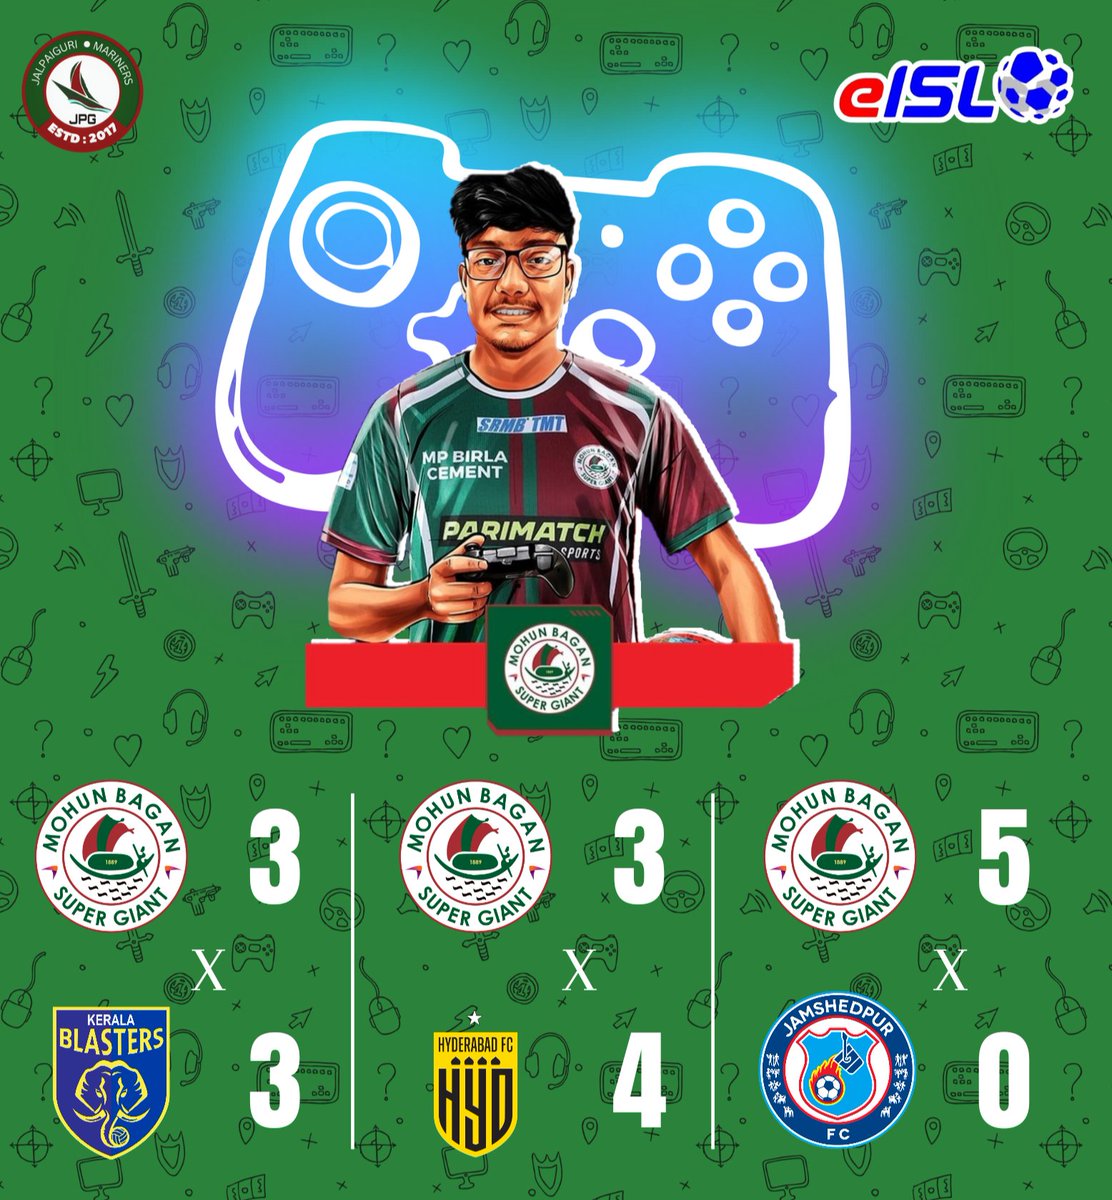 E-ISL game day 1 comes to an end with a mixed bag results for us.

Wish Md. Mahtabuddin, our representative, all the very best for tomorrow. 💚❤️

#Joymohunbagan #eisl #fifa #gaming #eafc #ea24 #আমরাসবুজমেরুন #jalpaigurimariners